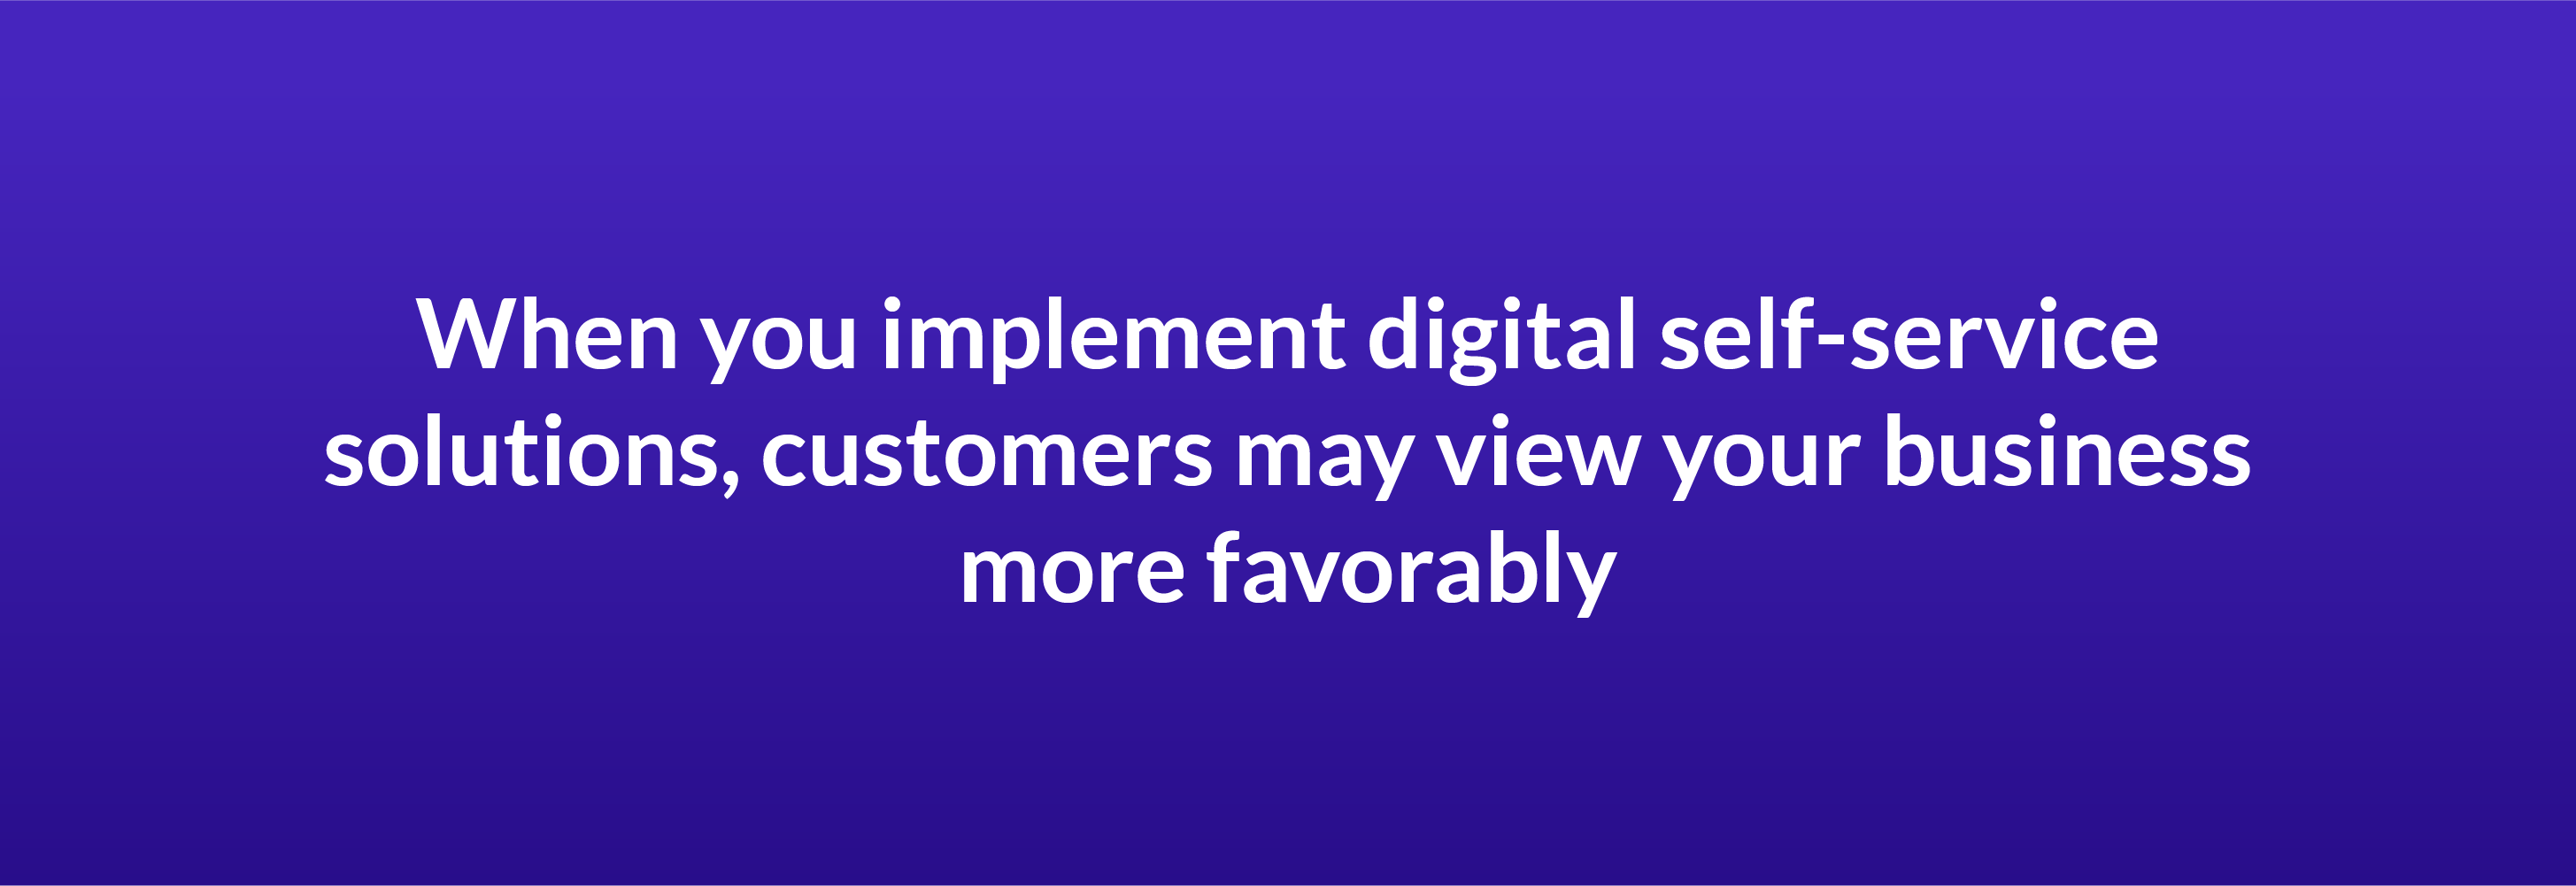 When you implement digital self-service solutions, customers may view your business more favorably